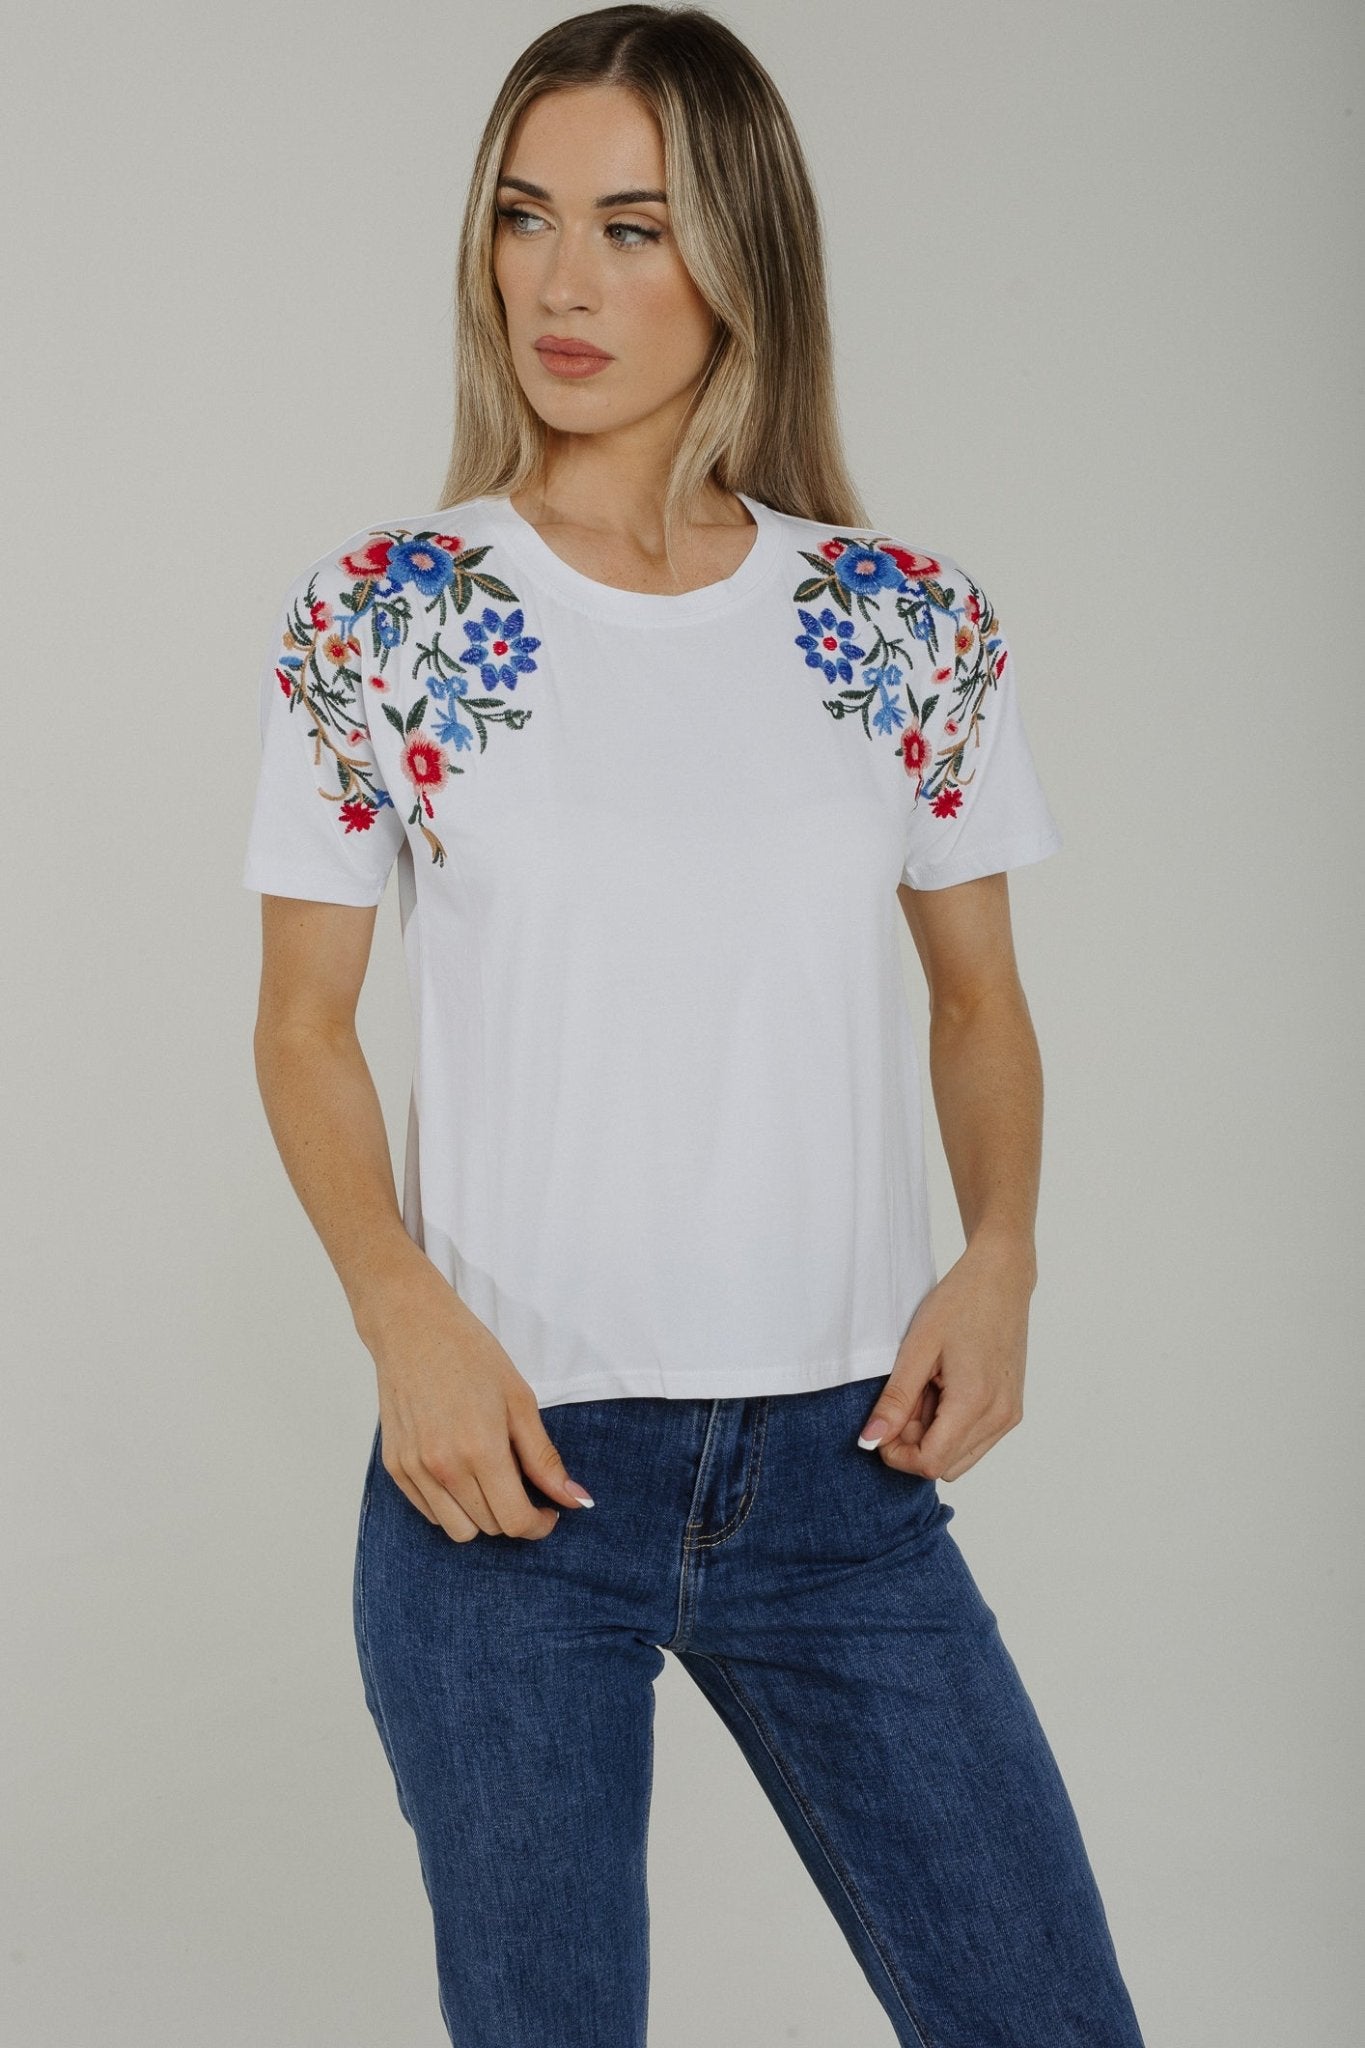 Sally Embroidered Shoulder T-Shirt In White - The Walk in Wardrobe